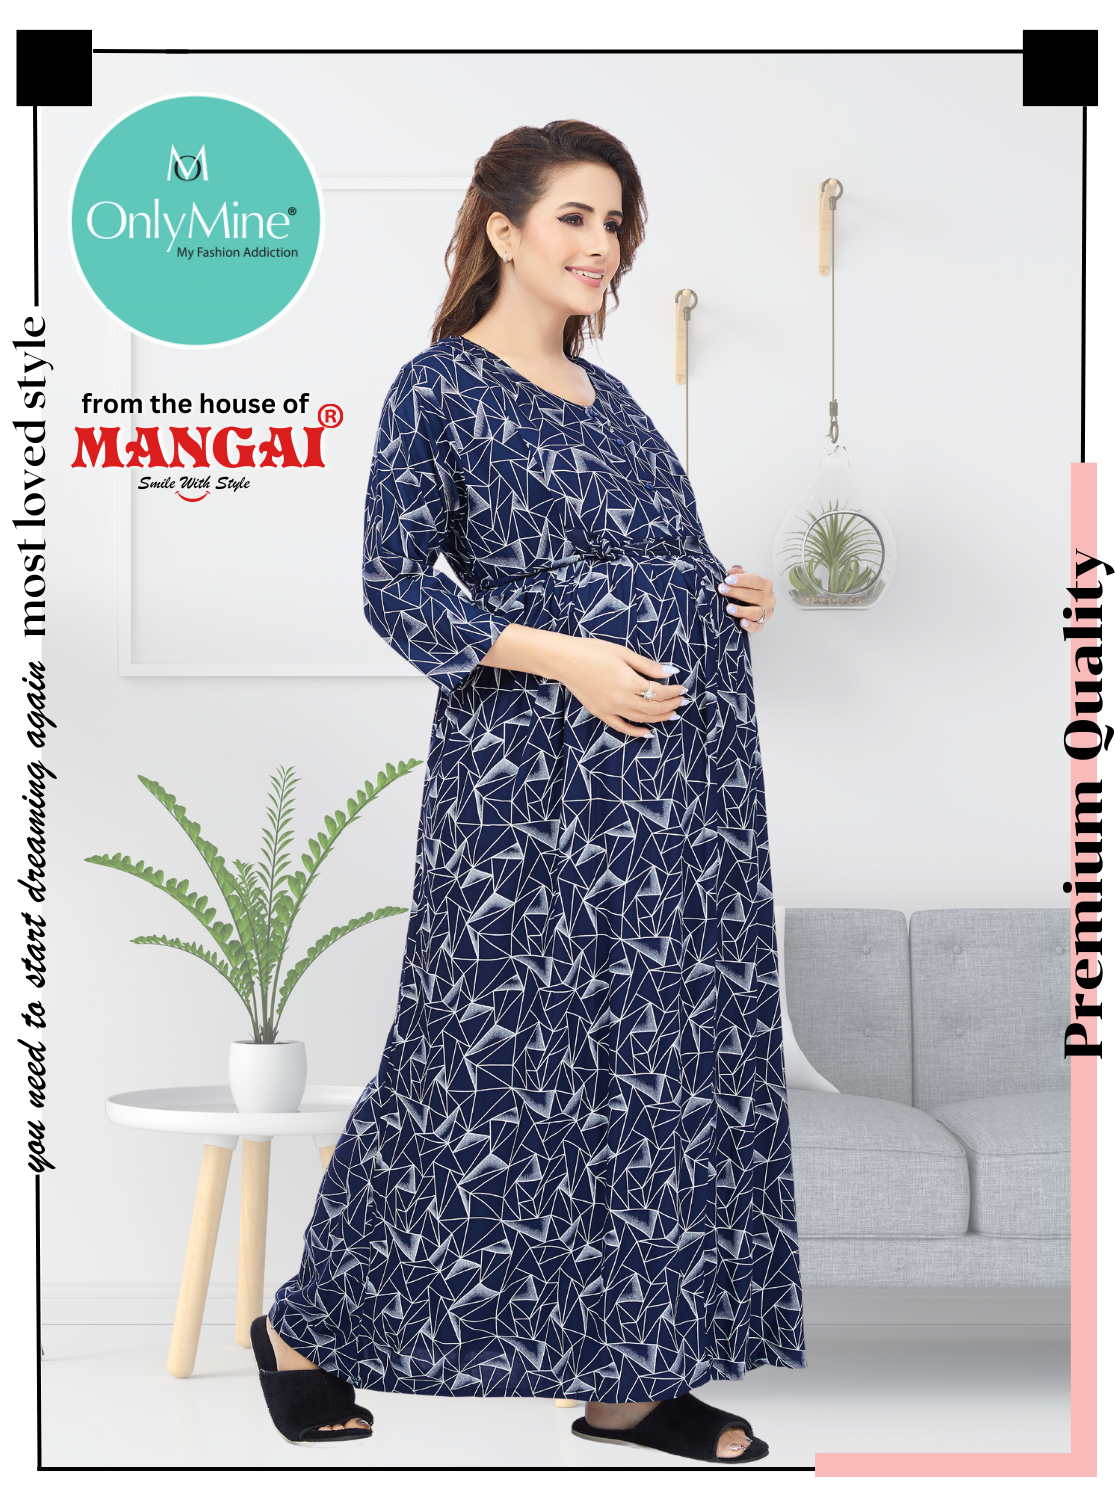 ONLY MINE New 4-IN-ONE Mom's Wear - Soft & Smooth Rayon | Maternity | Feeding | Maxi | Long Frock | Casual Wear